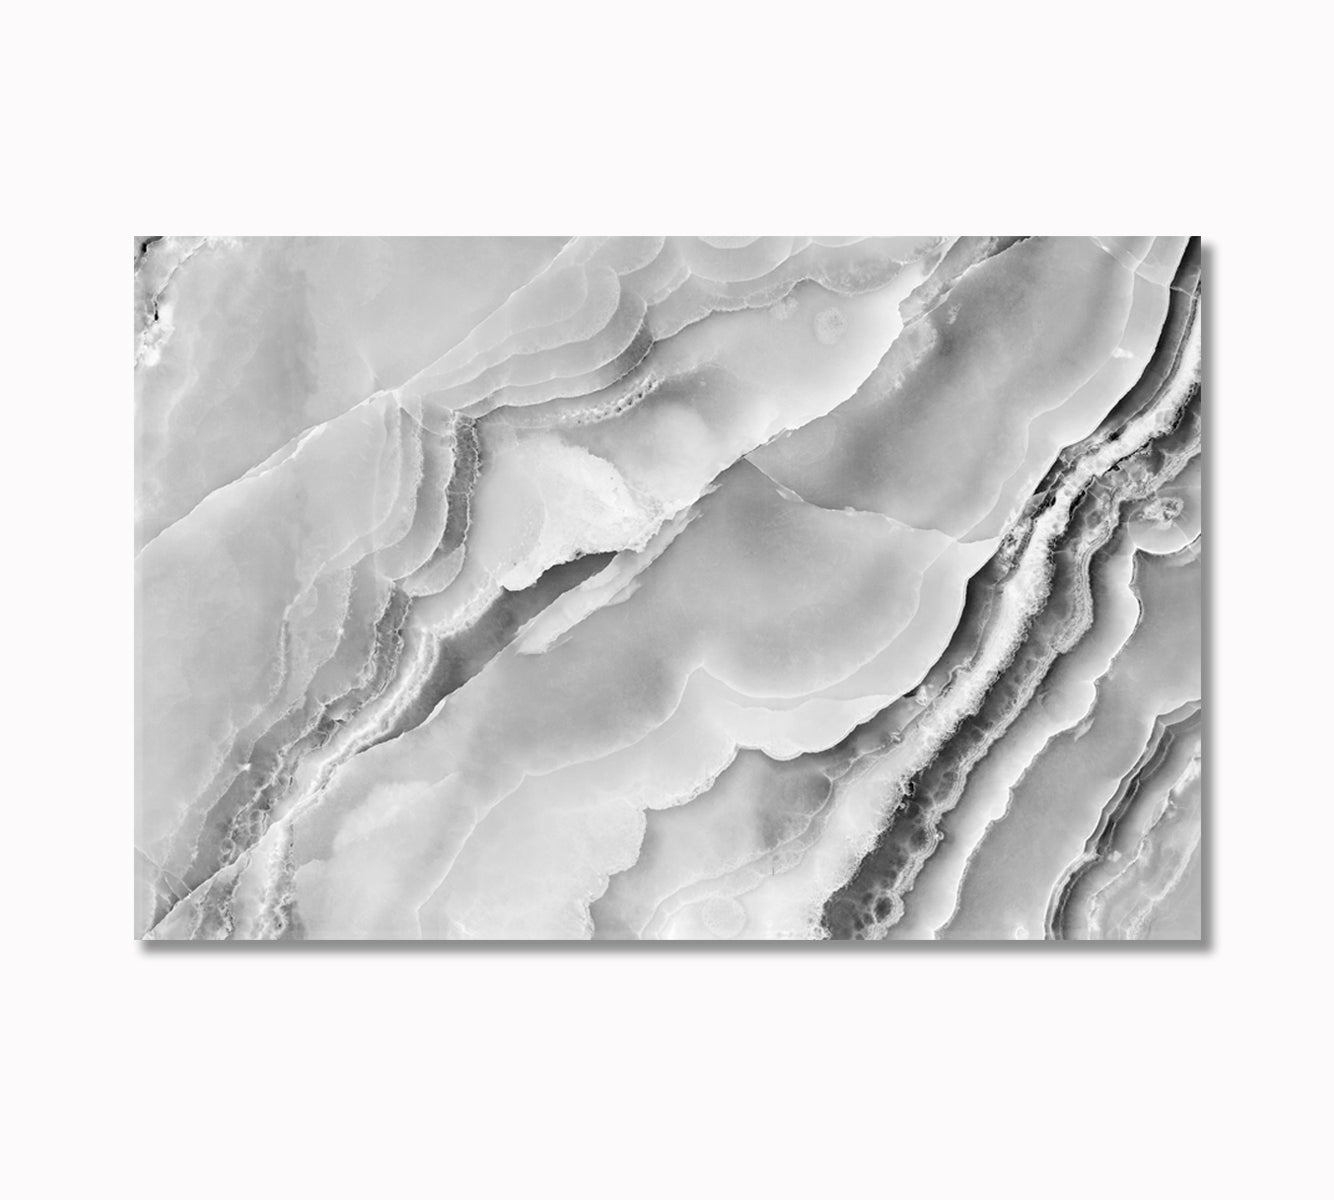 Natural White Marble Abstraction Canvas Print-Canvas Print-CetArt-1 Panel-24x16 inches-CetArt